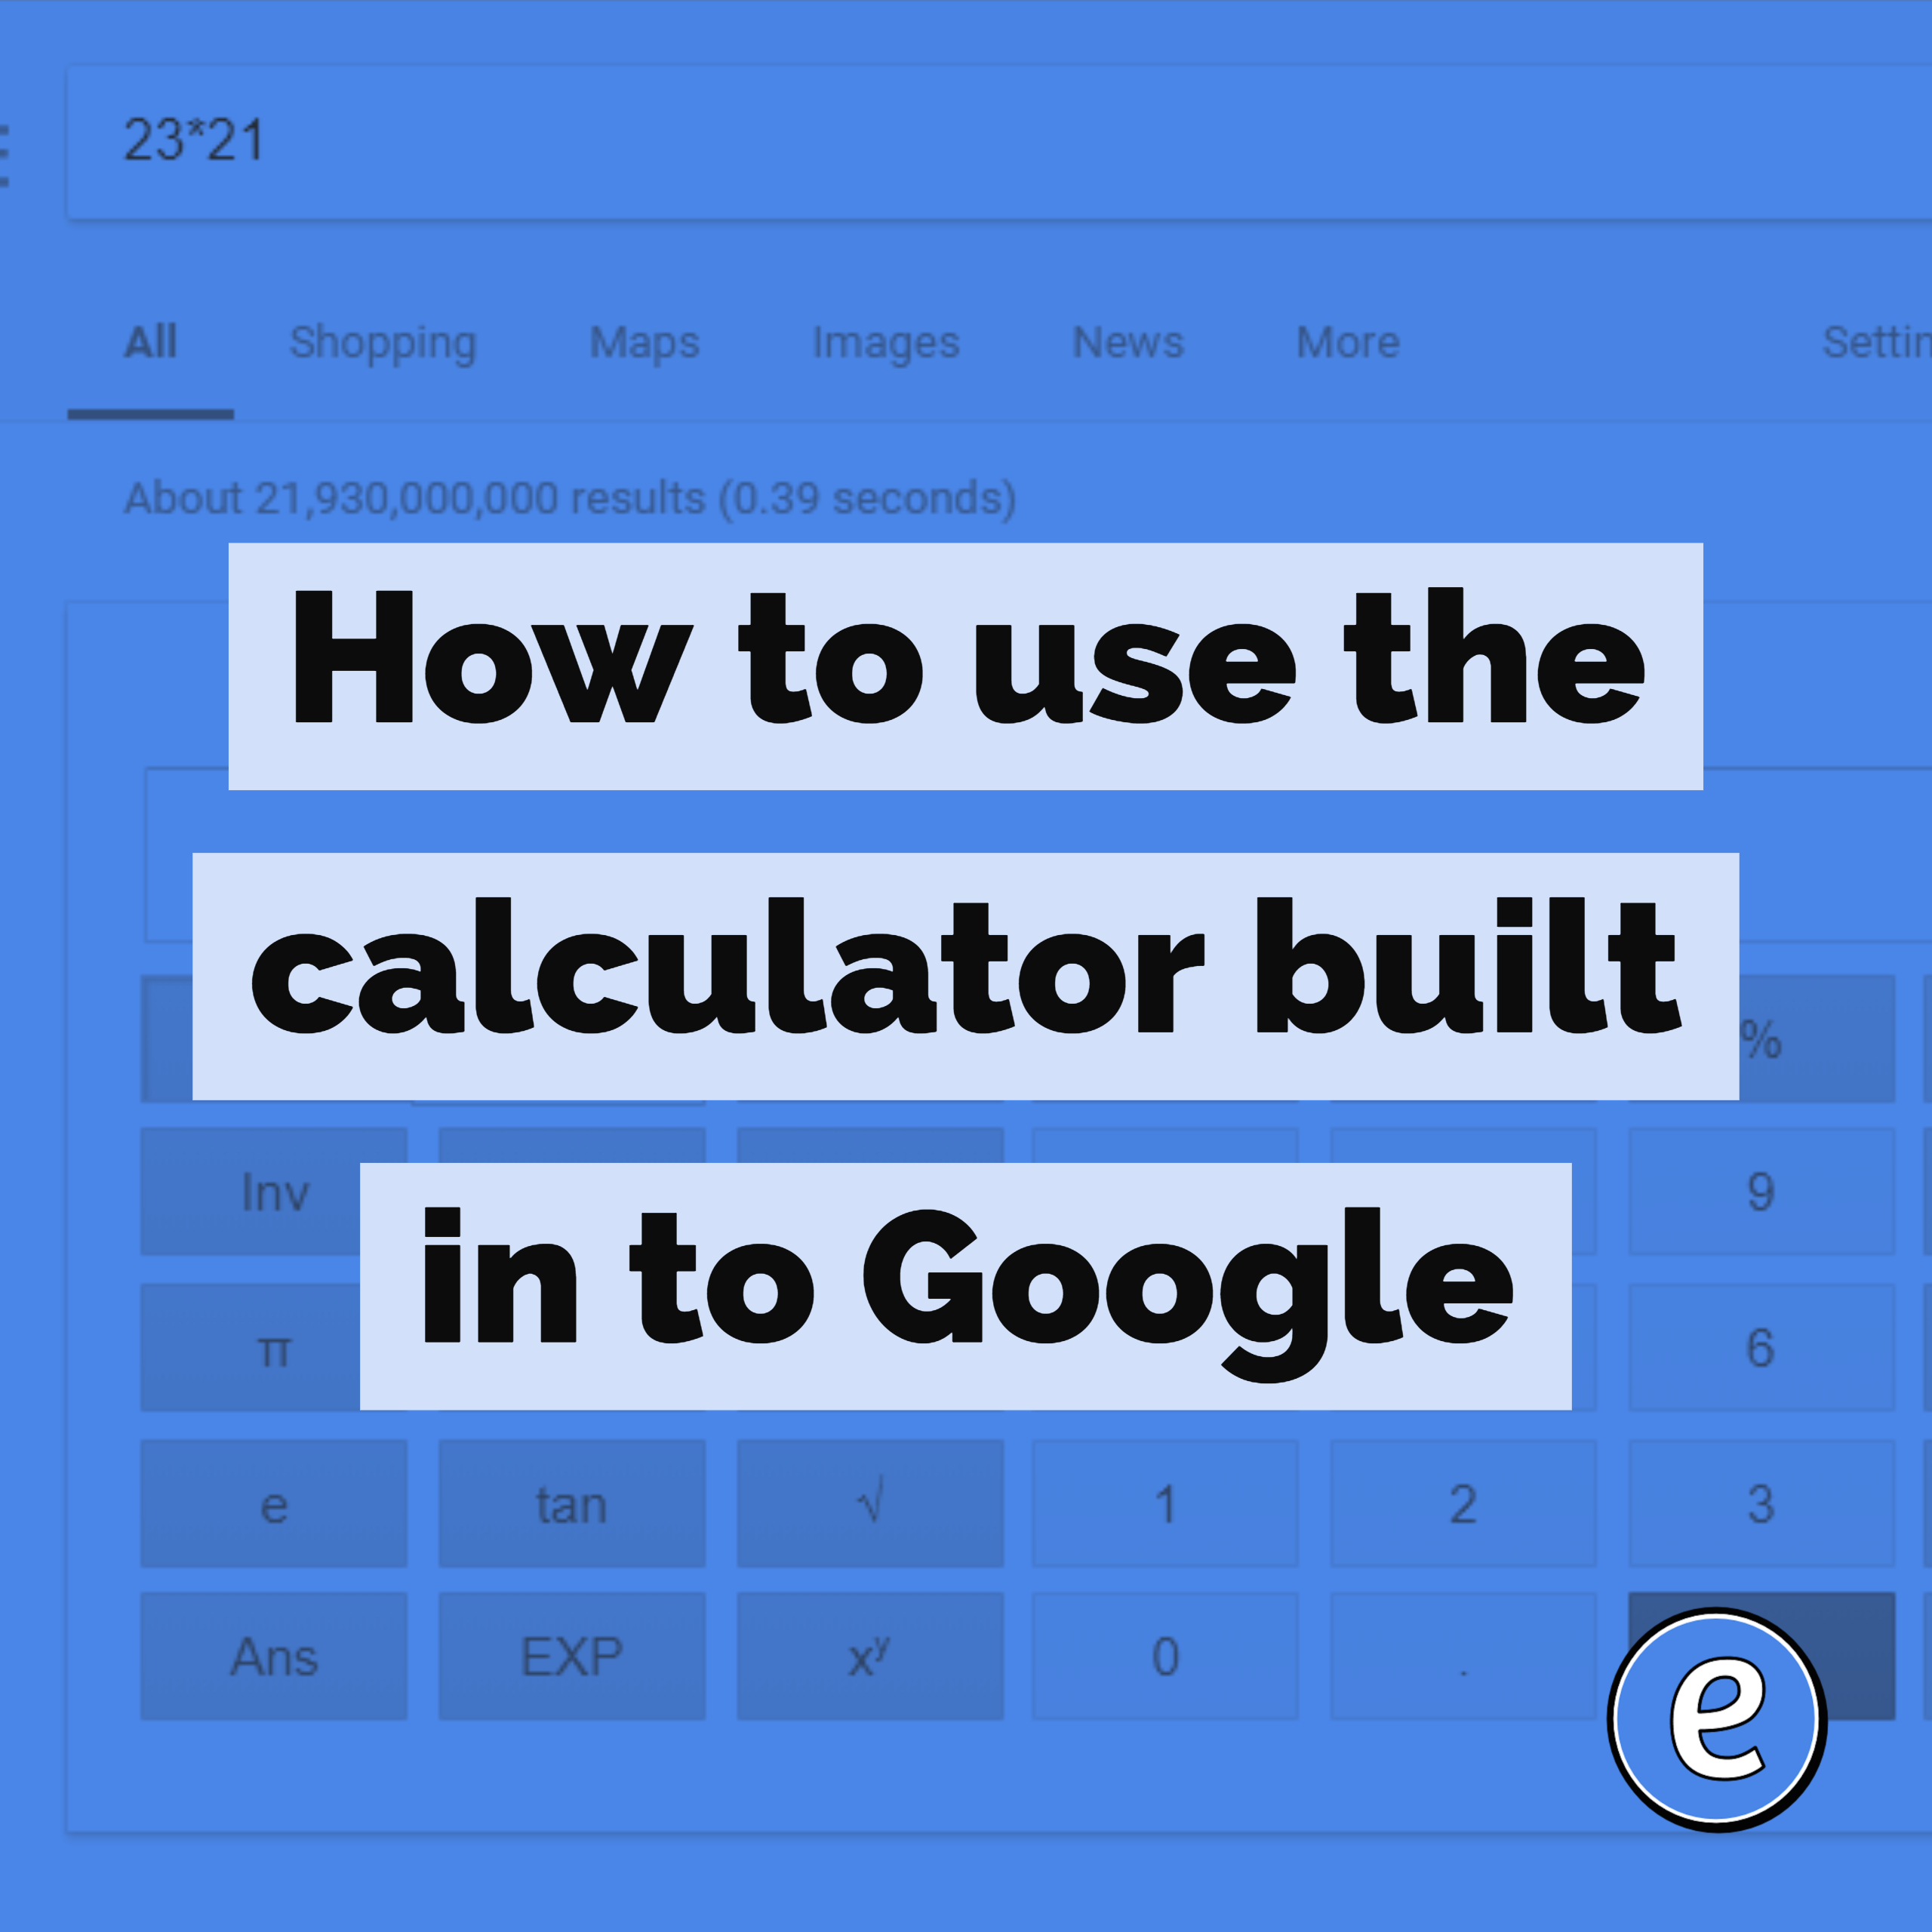 How to use the calculator, graphing calculator, and geometry calculator built in to Google